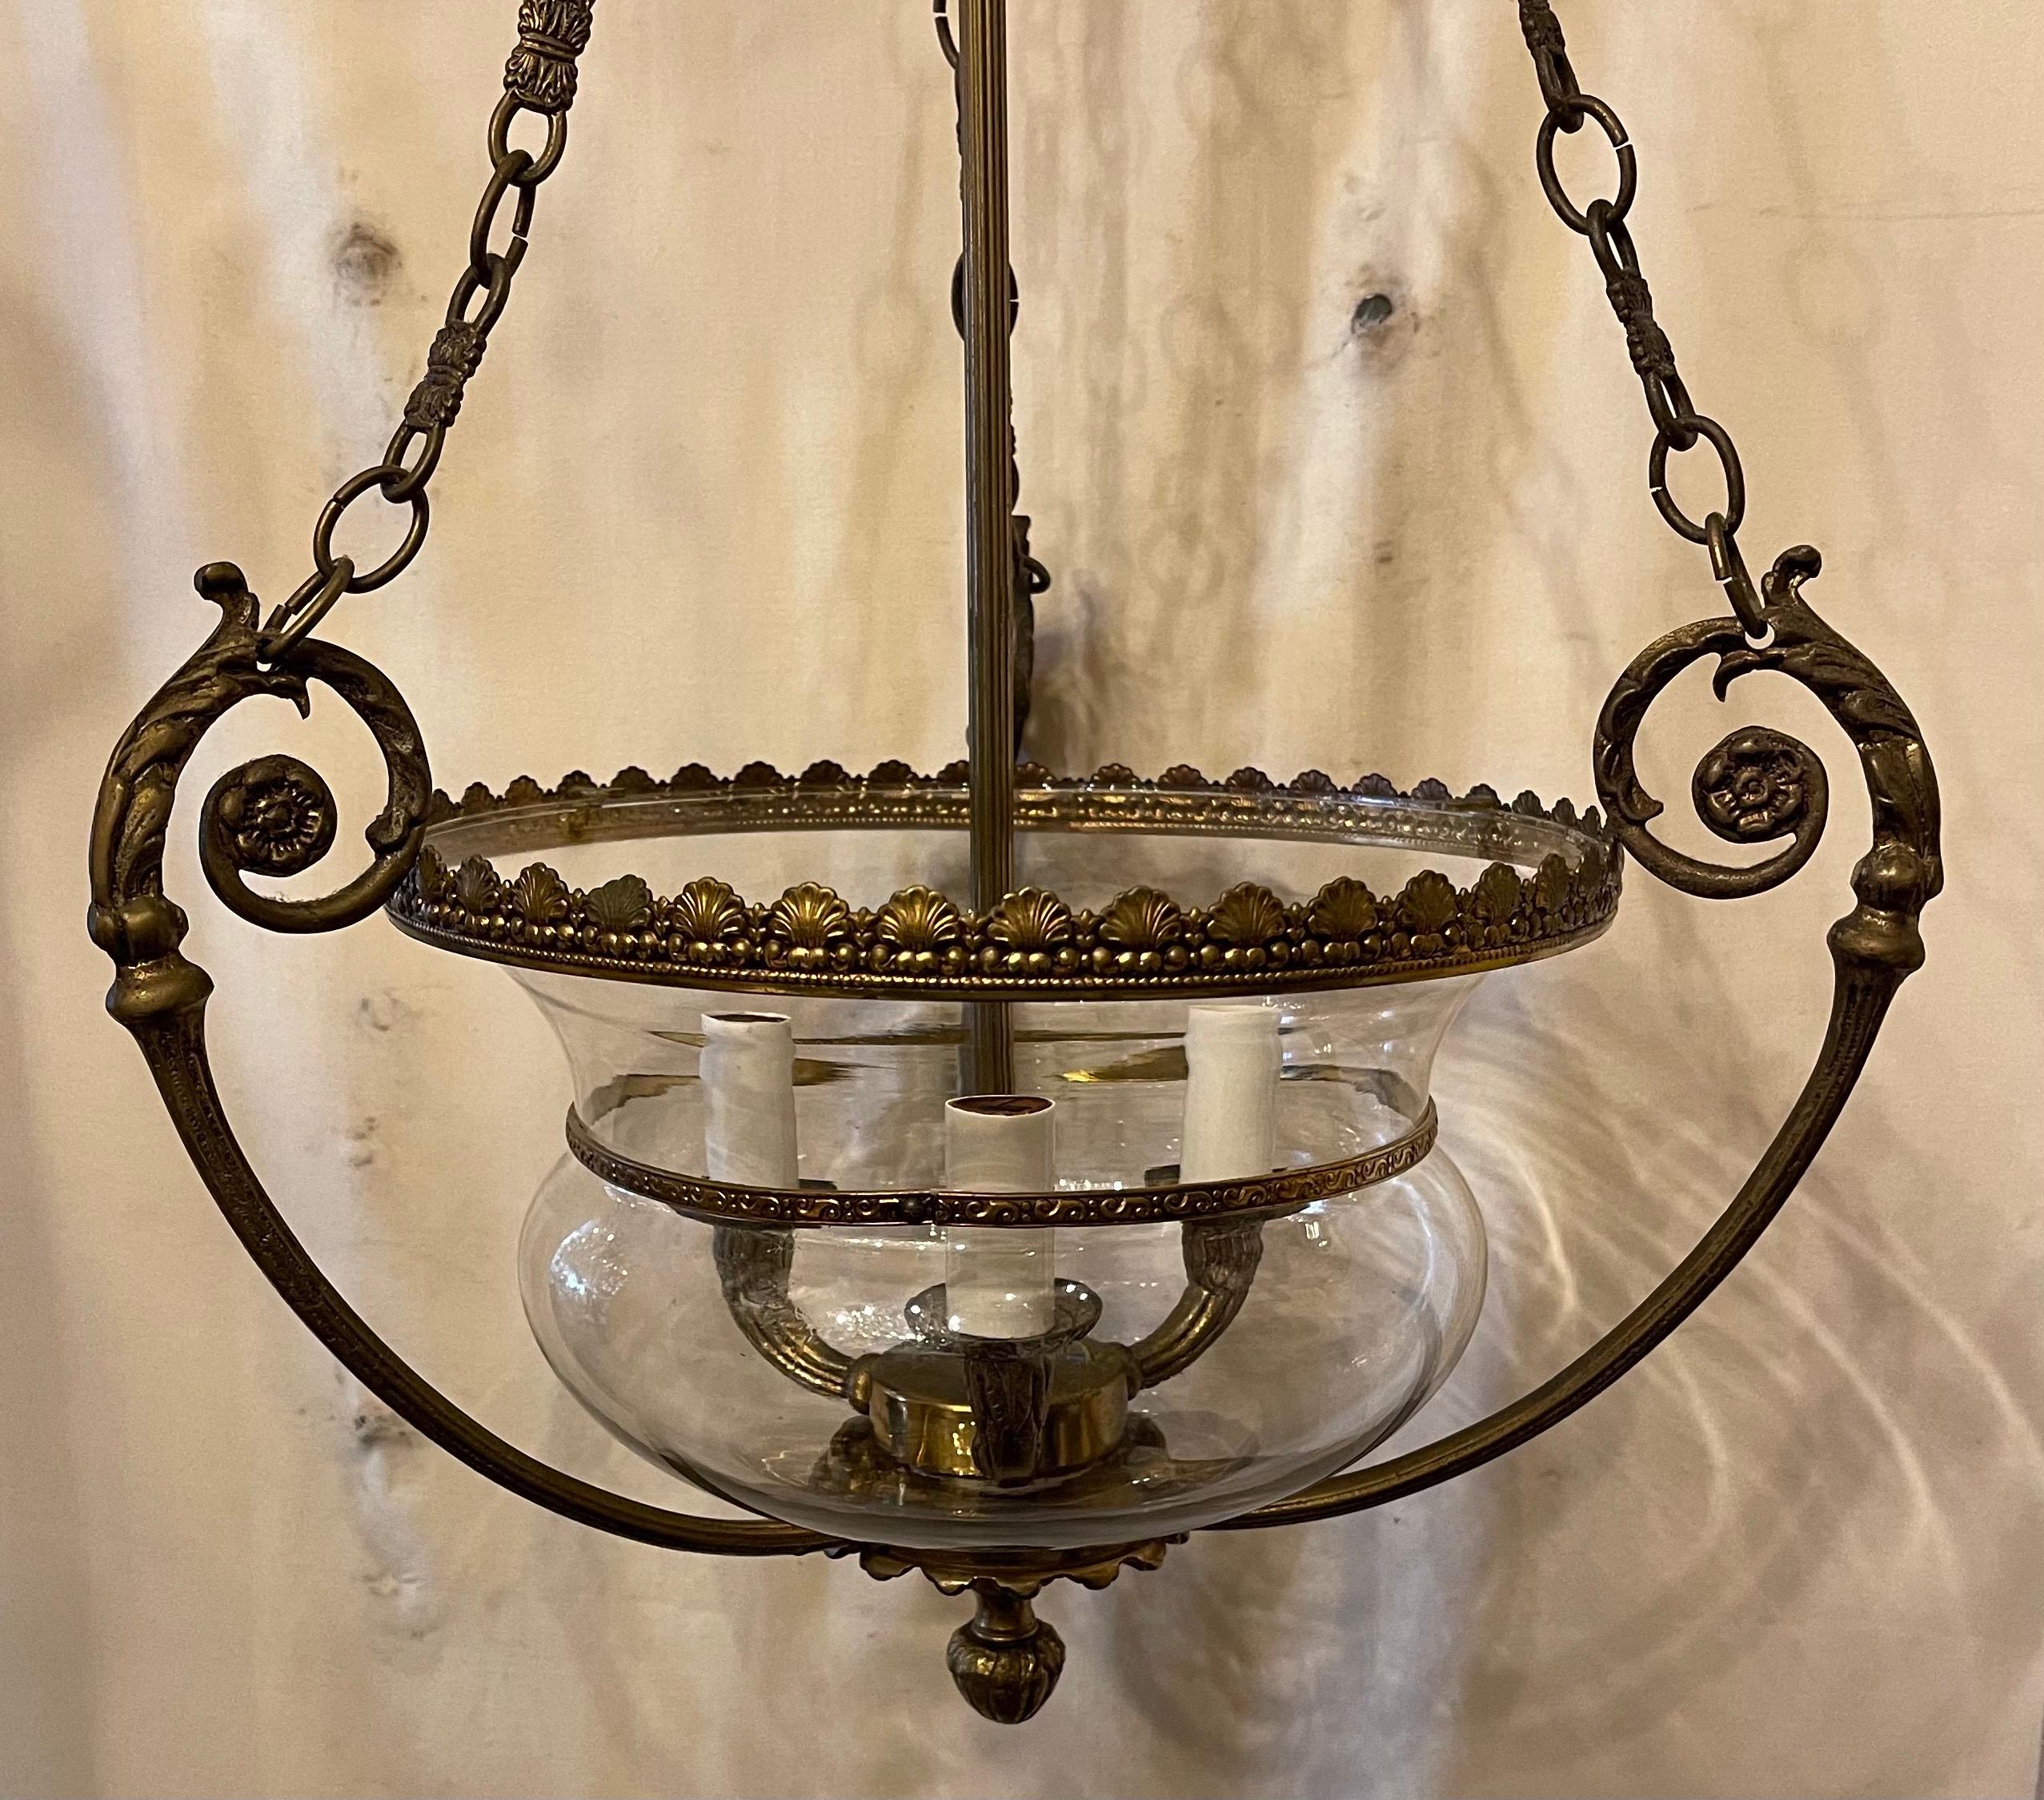 A wonderful French style semi flush mount bronze & glass bell jar form lantern chandelier fixture with 3 candelabra sockets each taking 40 watts, rewired and ready to install with adjustable canopy and mounting hardware.